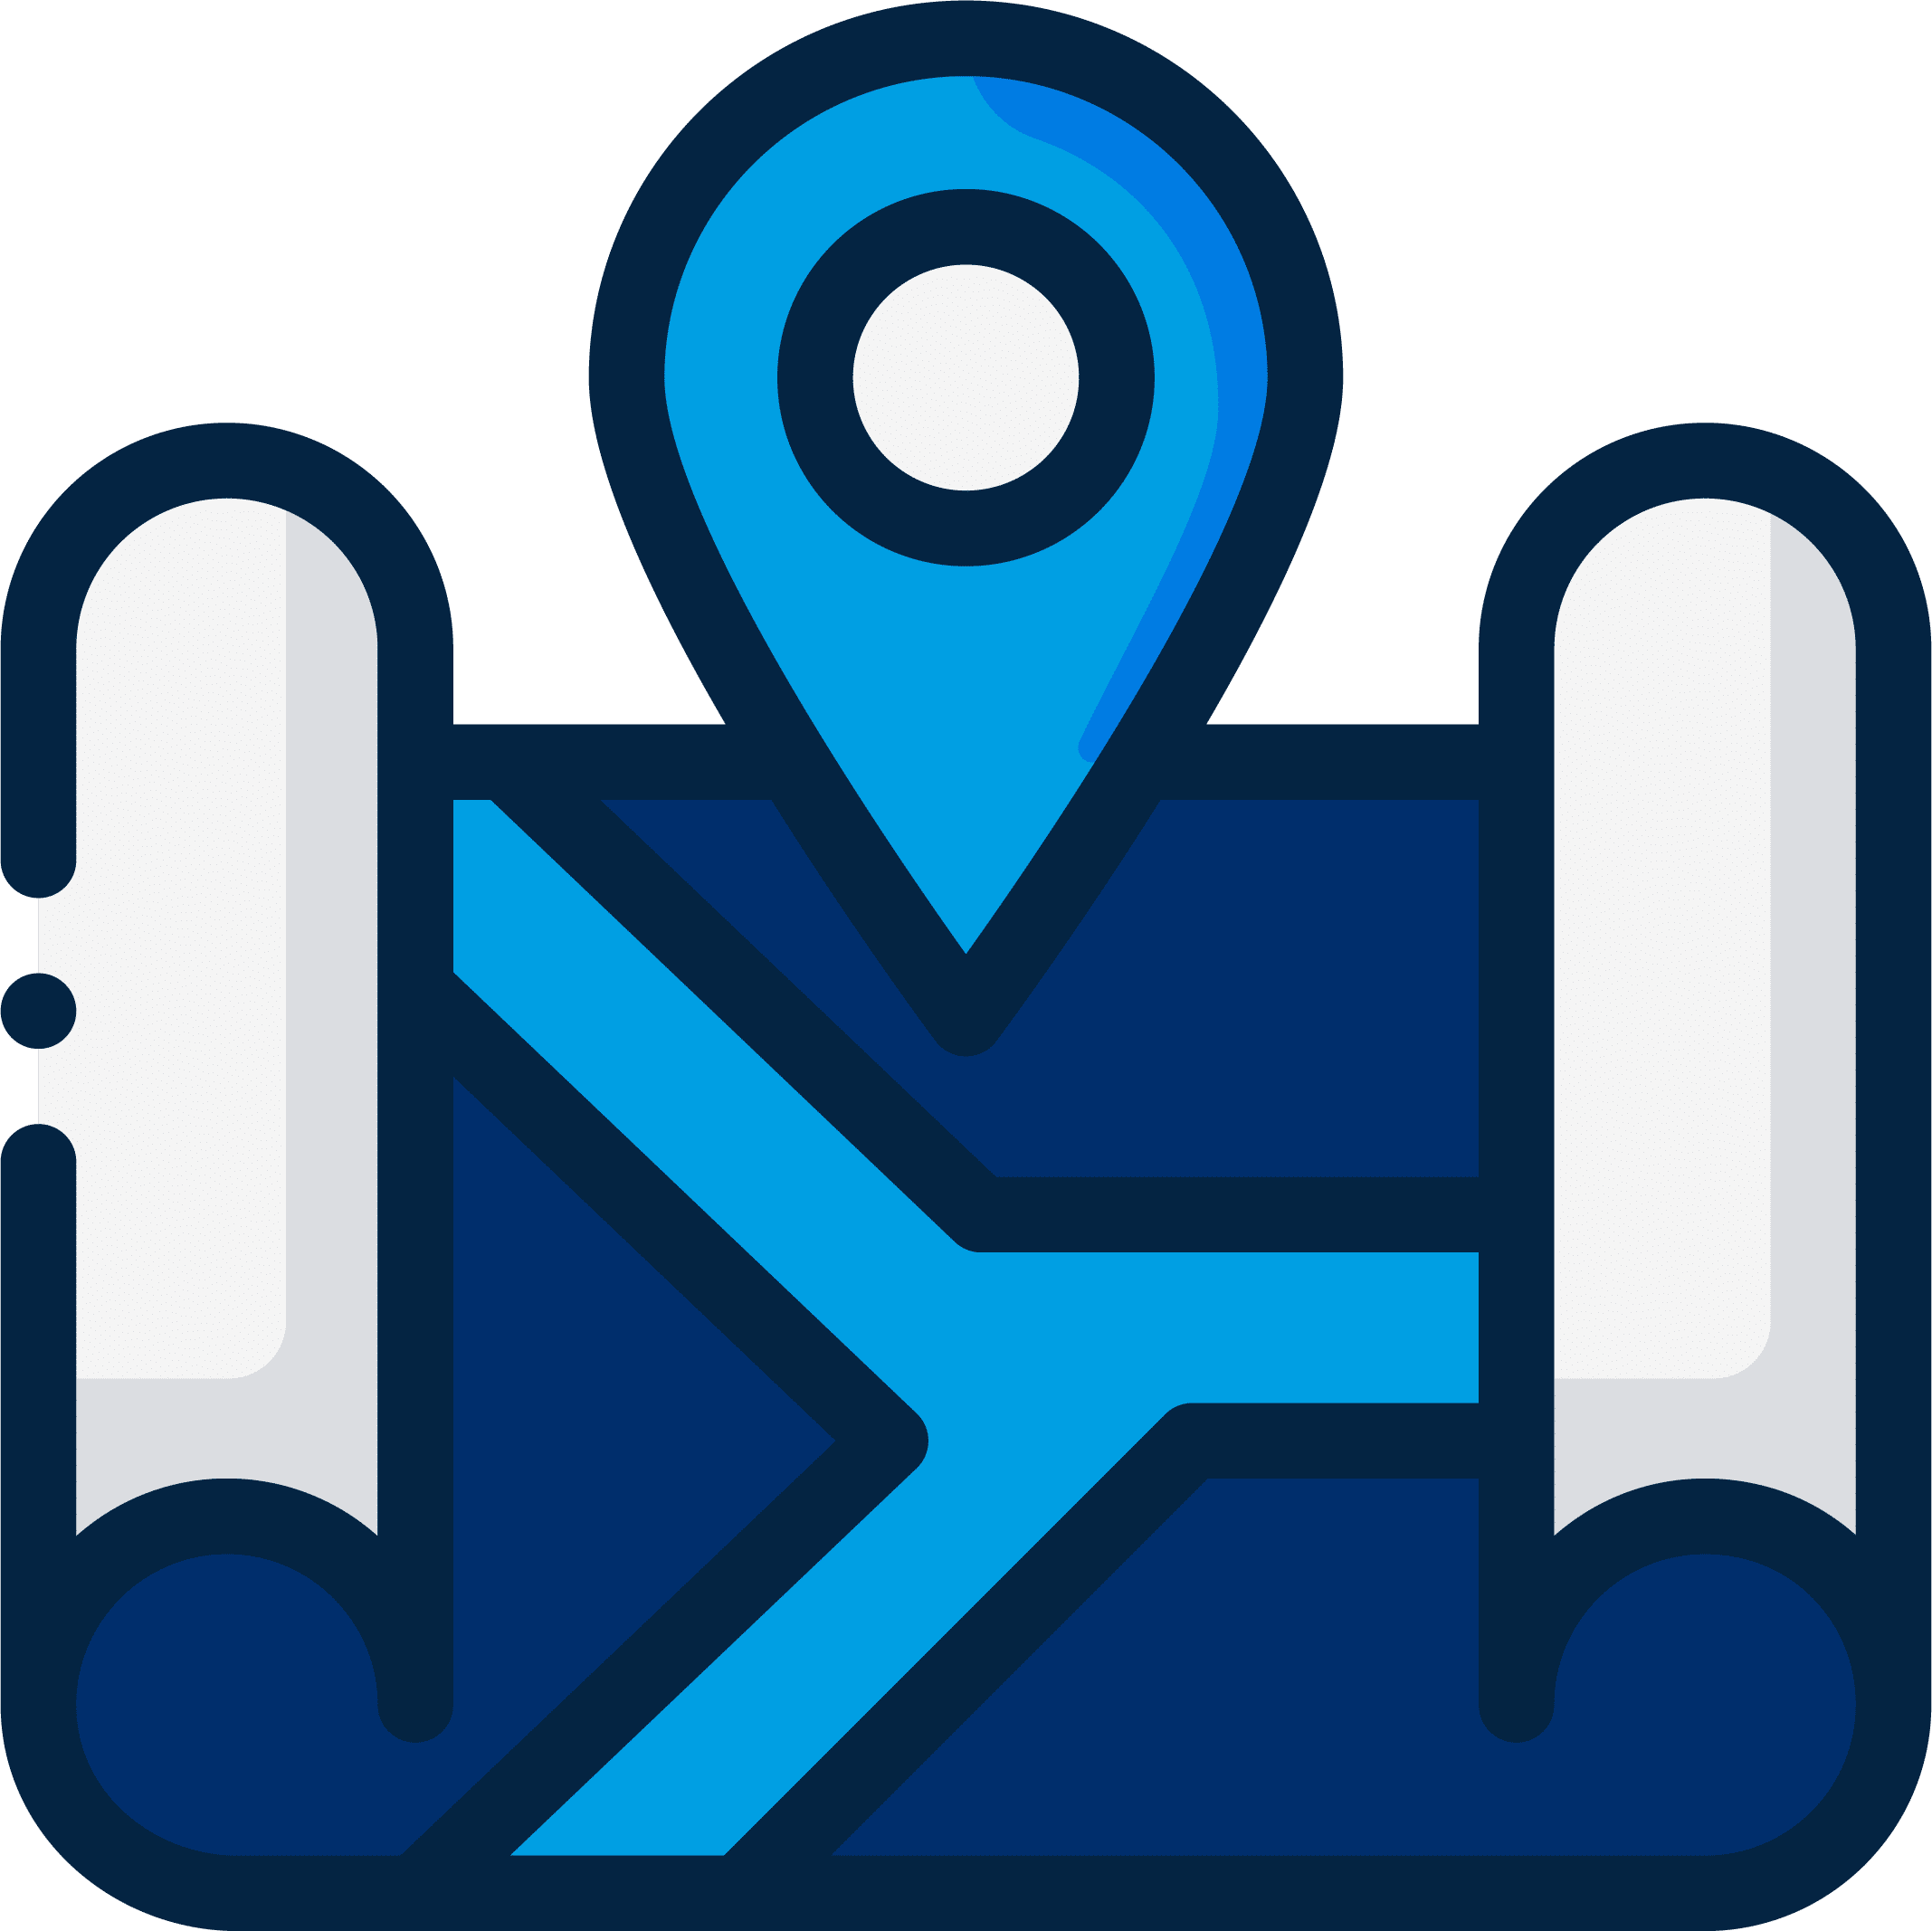 Local map icon